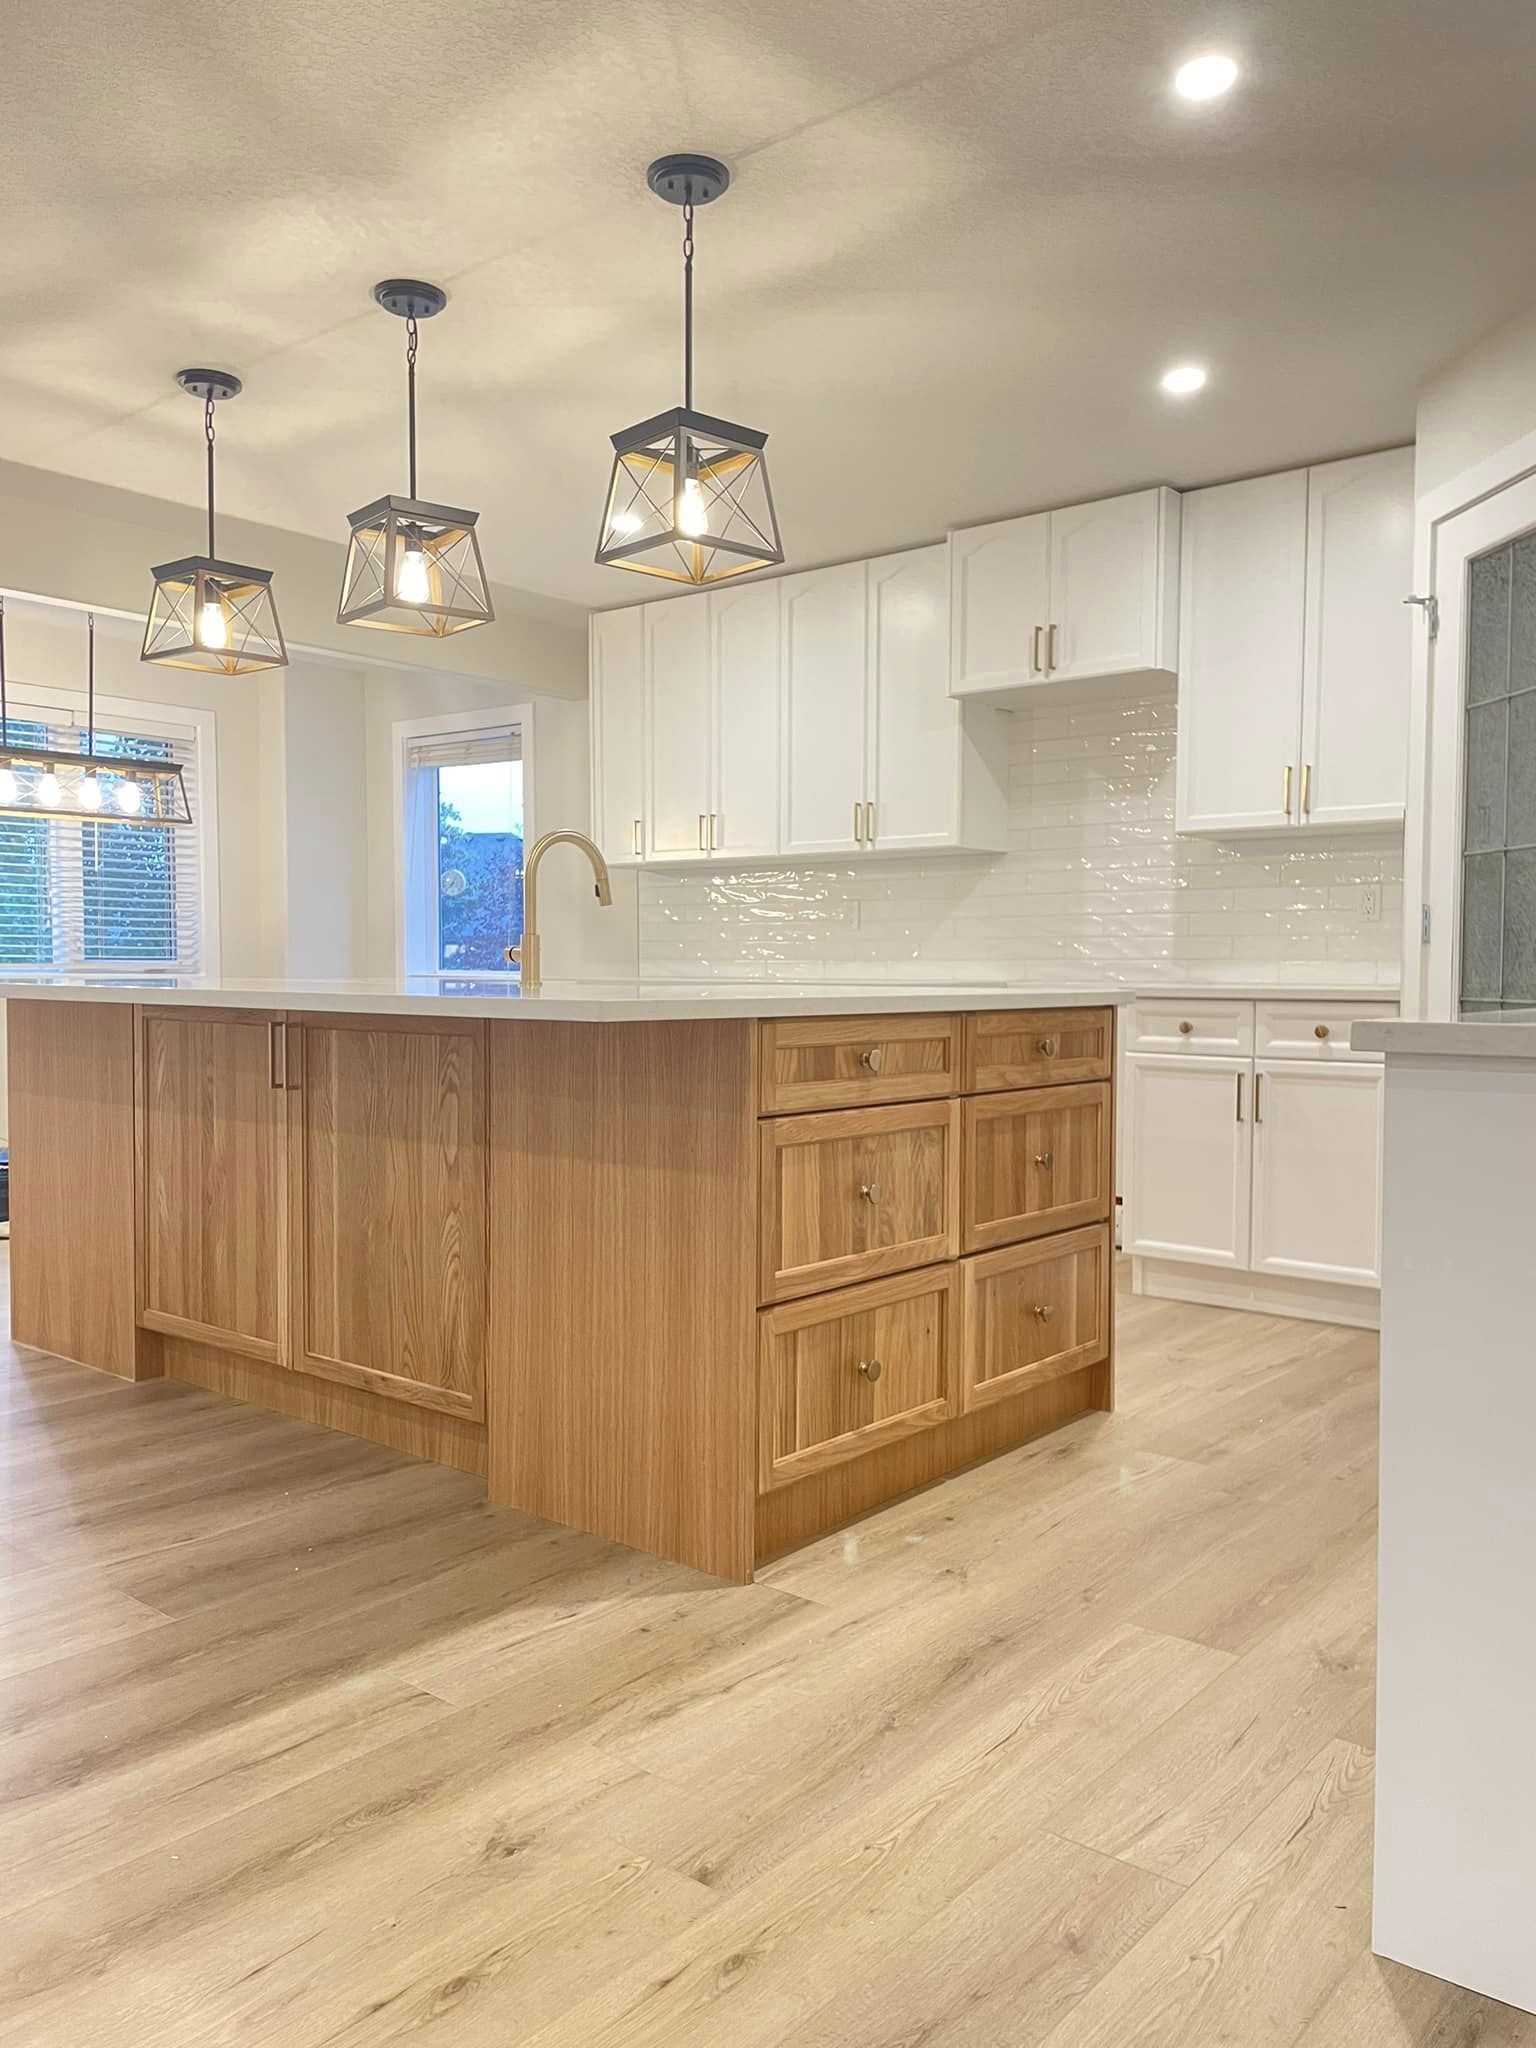 A wide view of a modern kitchen with large island and accent overhead lighting.